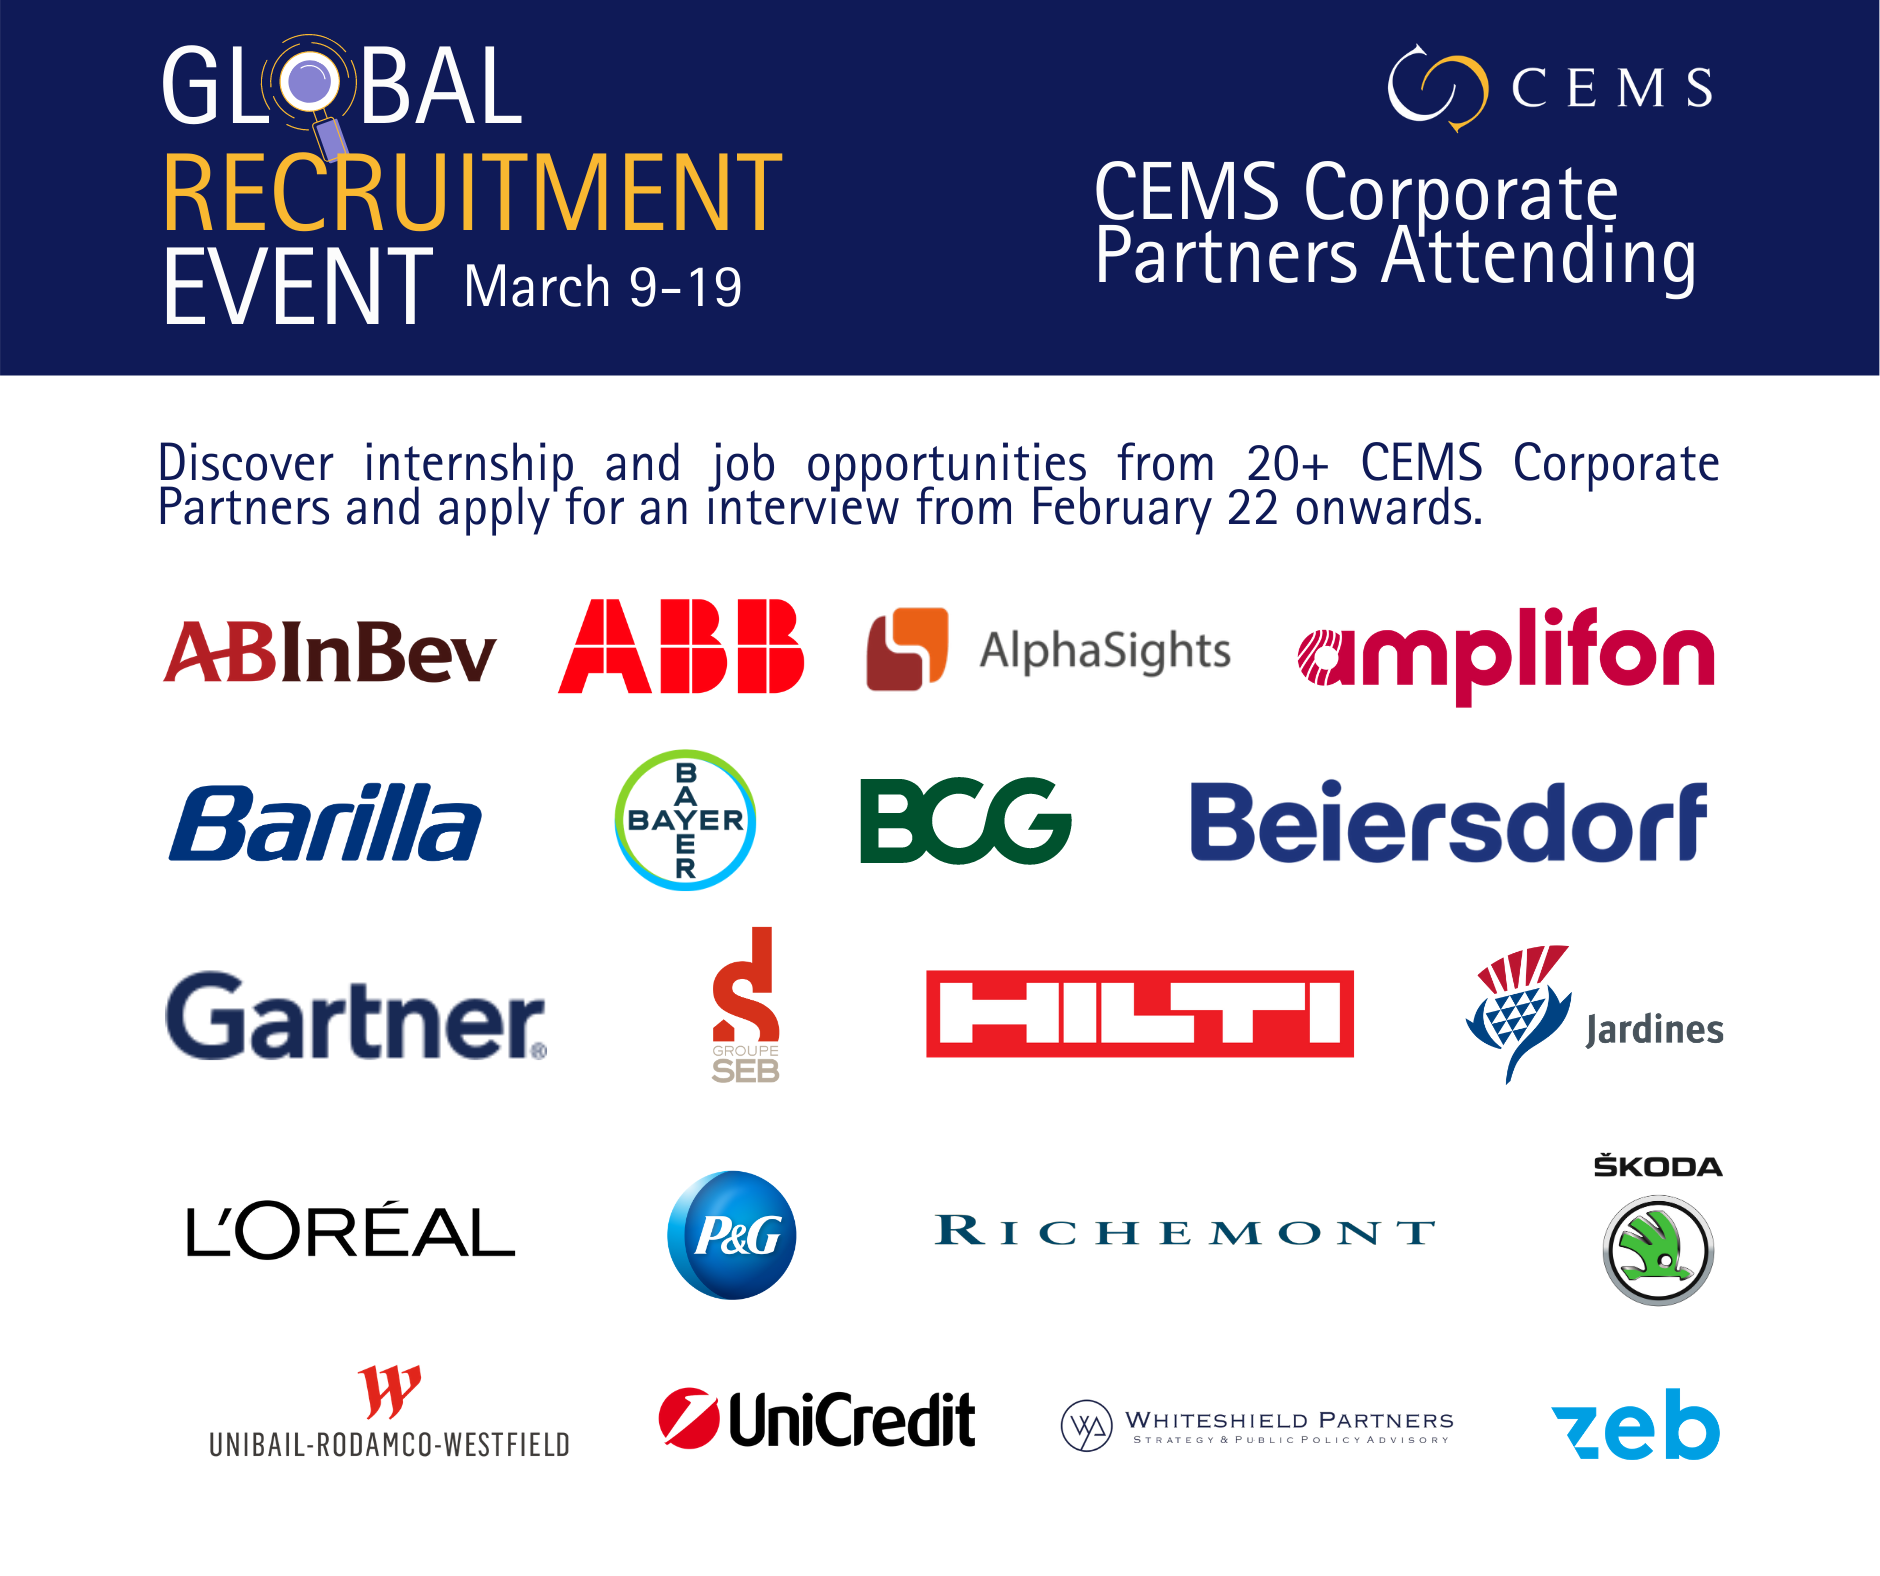 CEMS Corporate Partners participating in the event